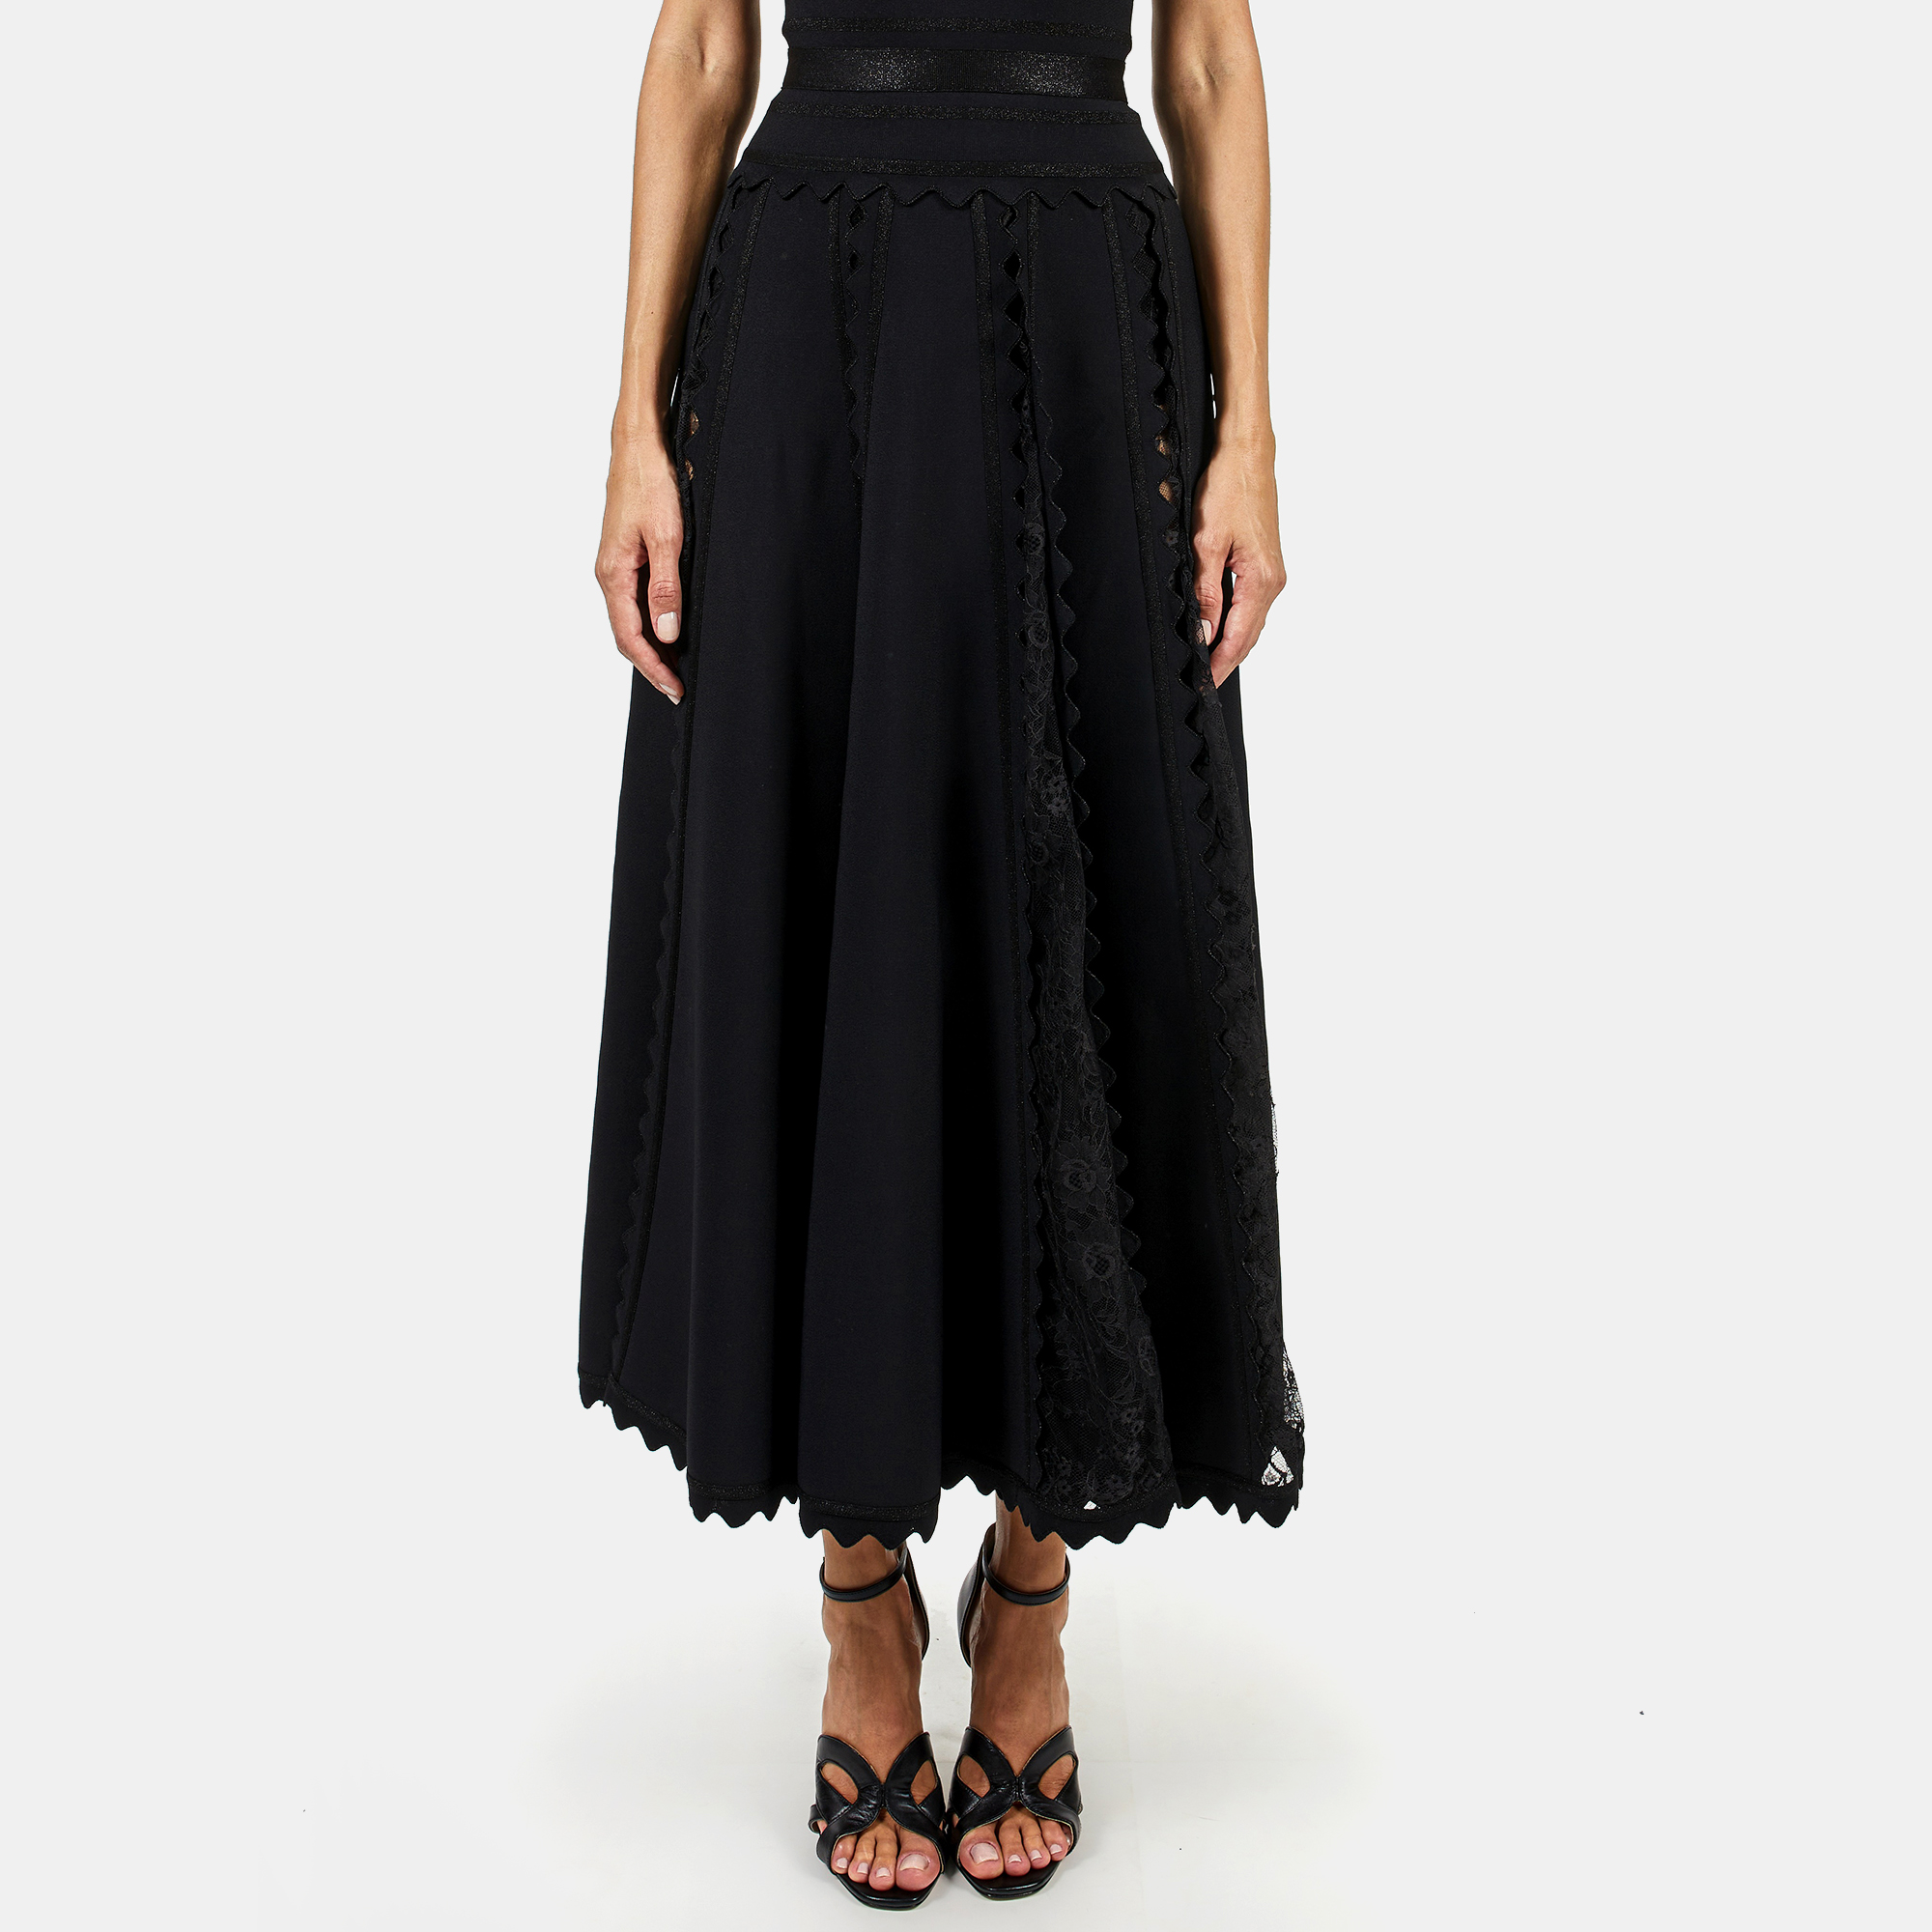 Pre-owned Elie Saab Black Knit & Lace Inset Flare Midi Skirt L